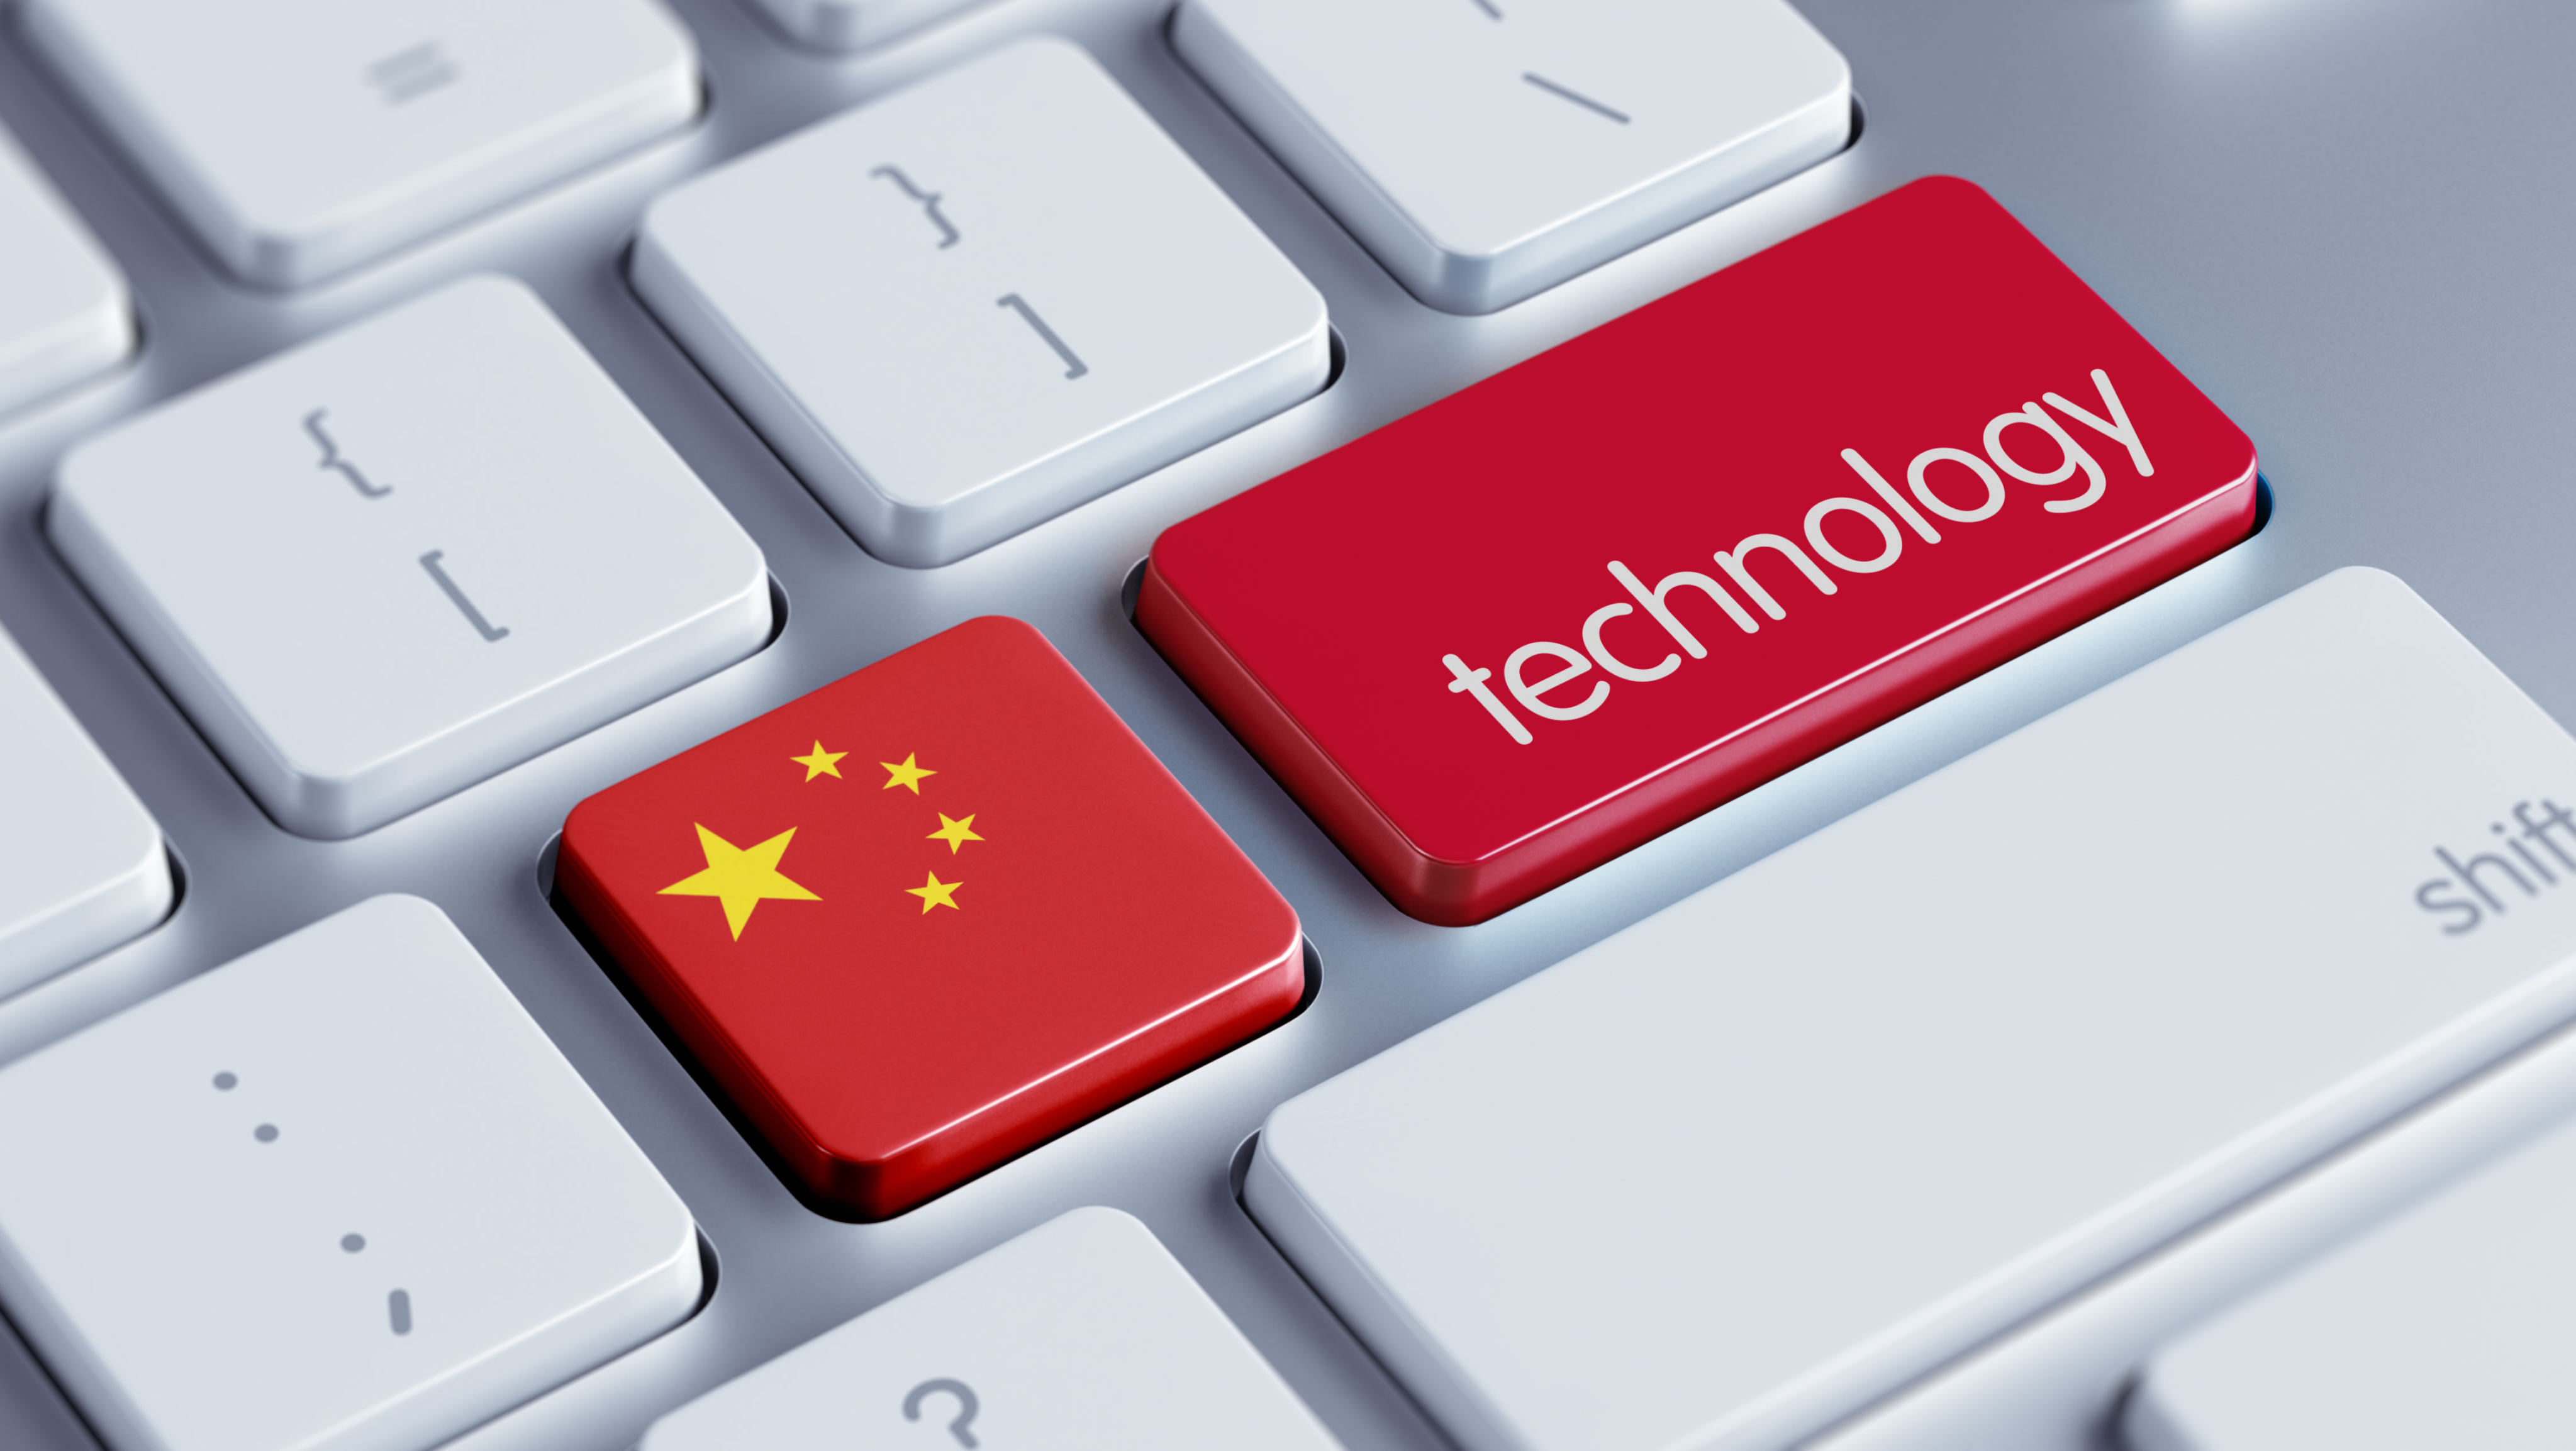 The strong endorsement from China’s Politburo Standing Committee, the country’s highest policymaking body, underscores Beijing’s resolve to enable Big Tech companies to resume their growth trajectory. Image: Shutterstock